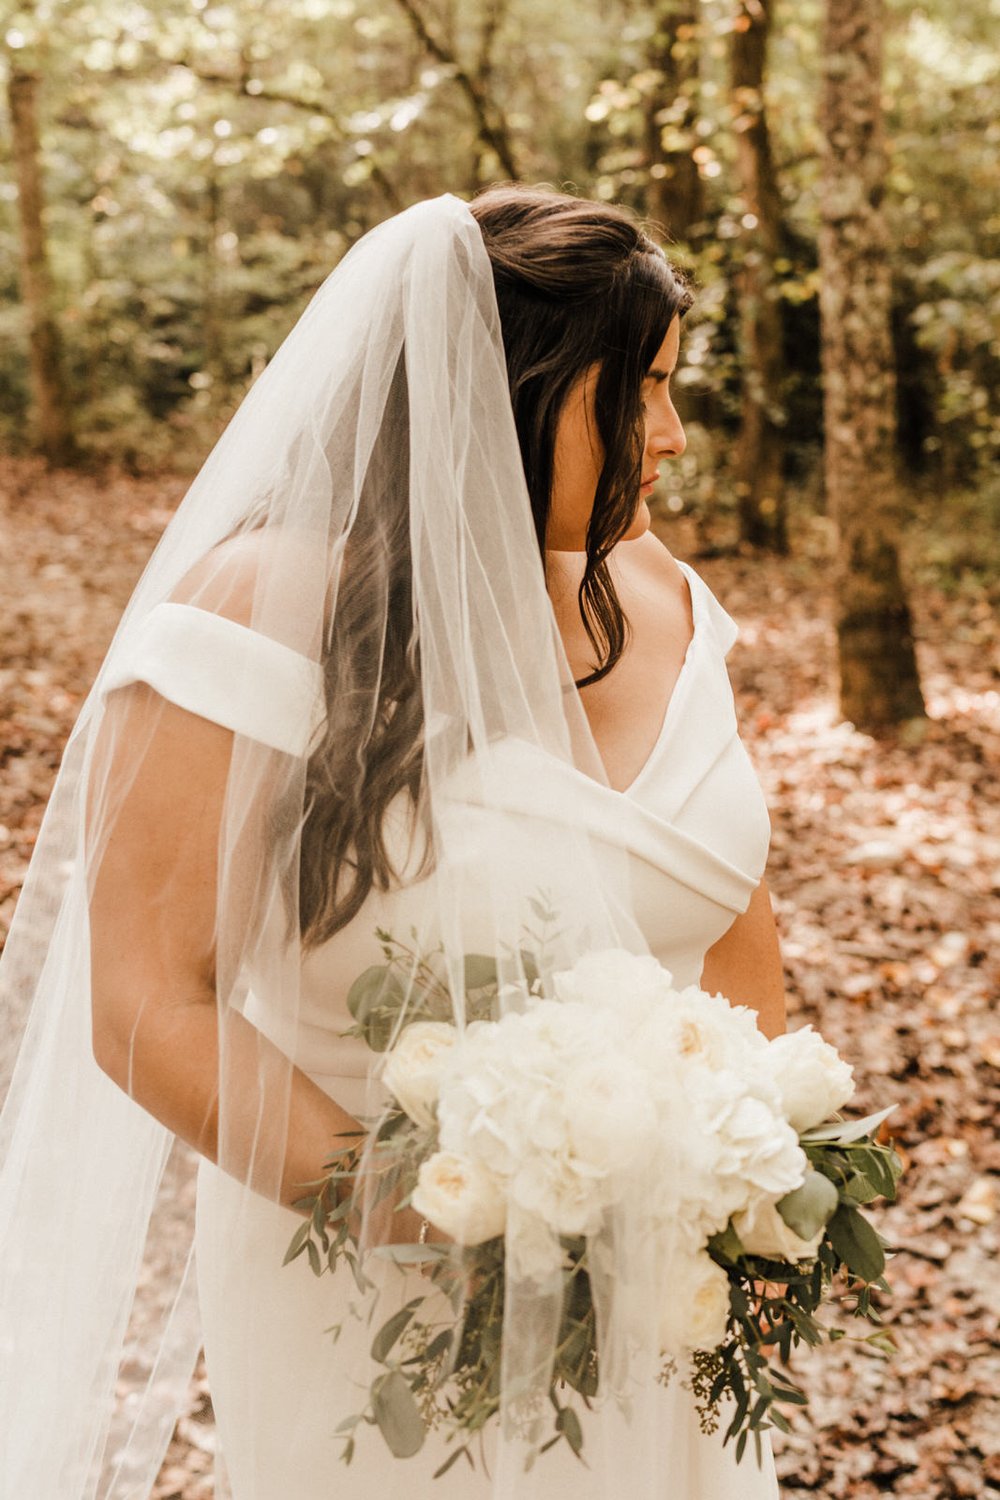 Detail-of-Long-Bridal-Veil-and-Classic-White-Bouquet-on-Woodsy-Georgia-Wedding-Bride.jpg